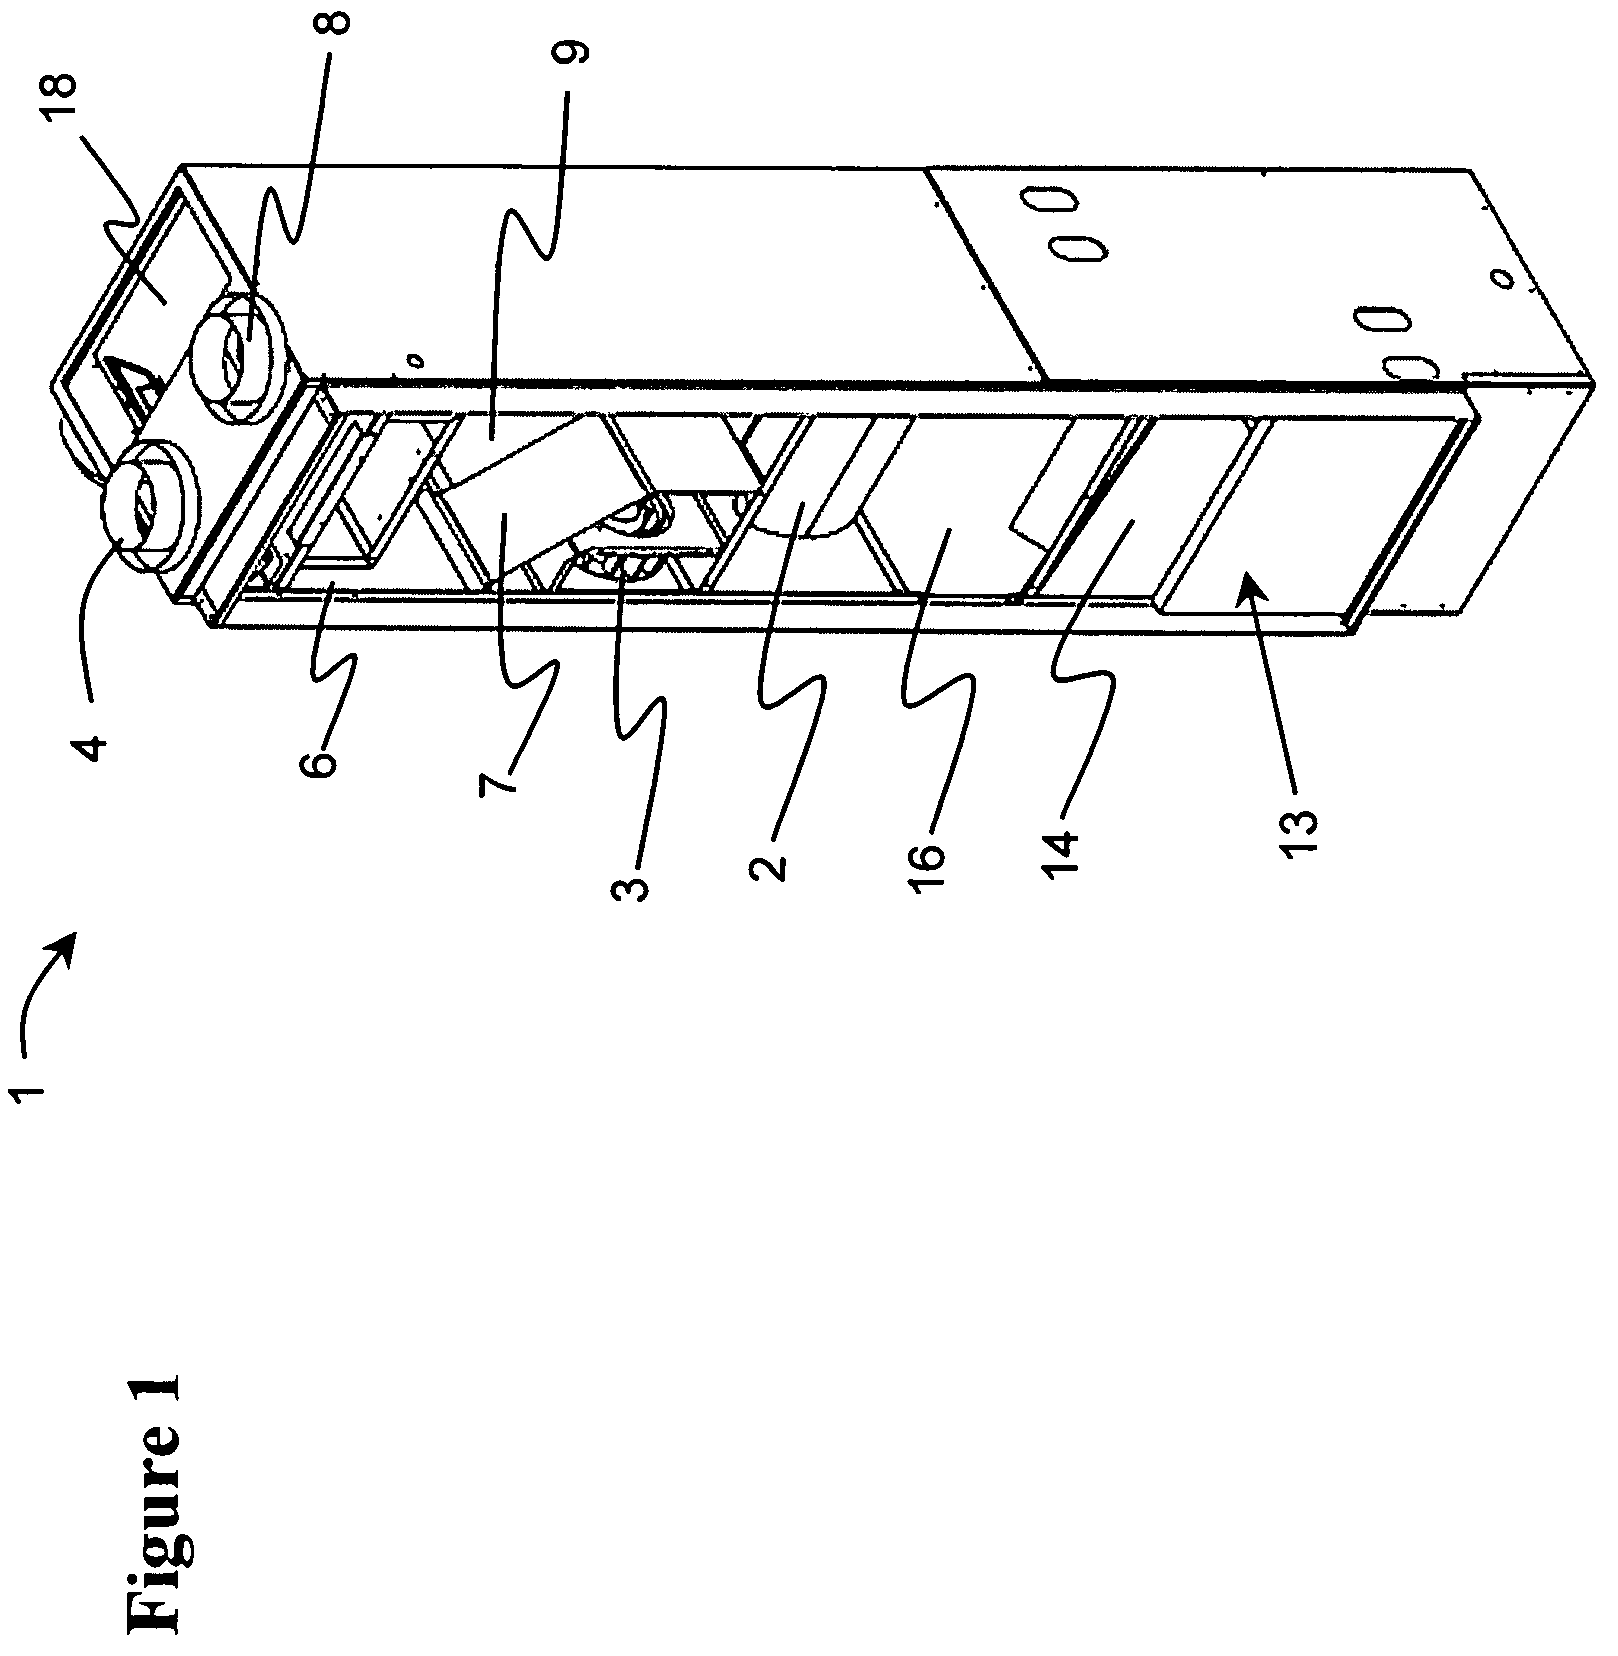 Heat recovery ventilator with defrost